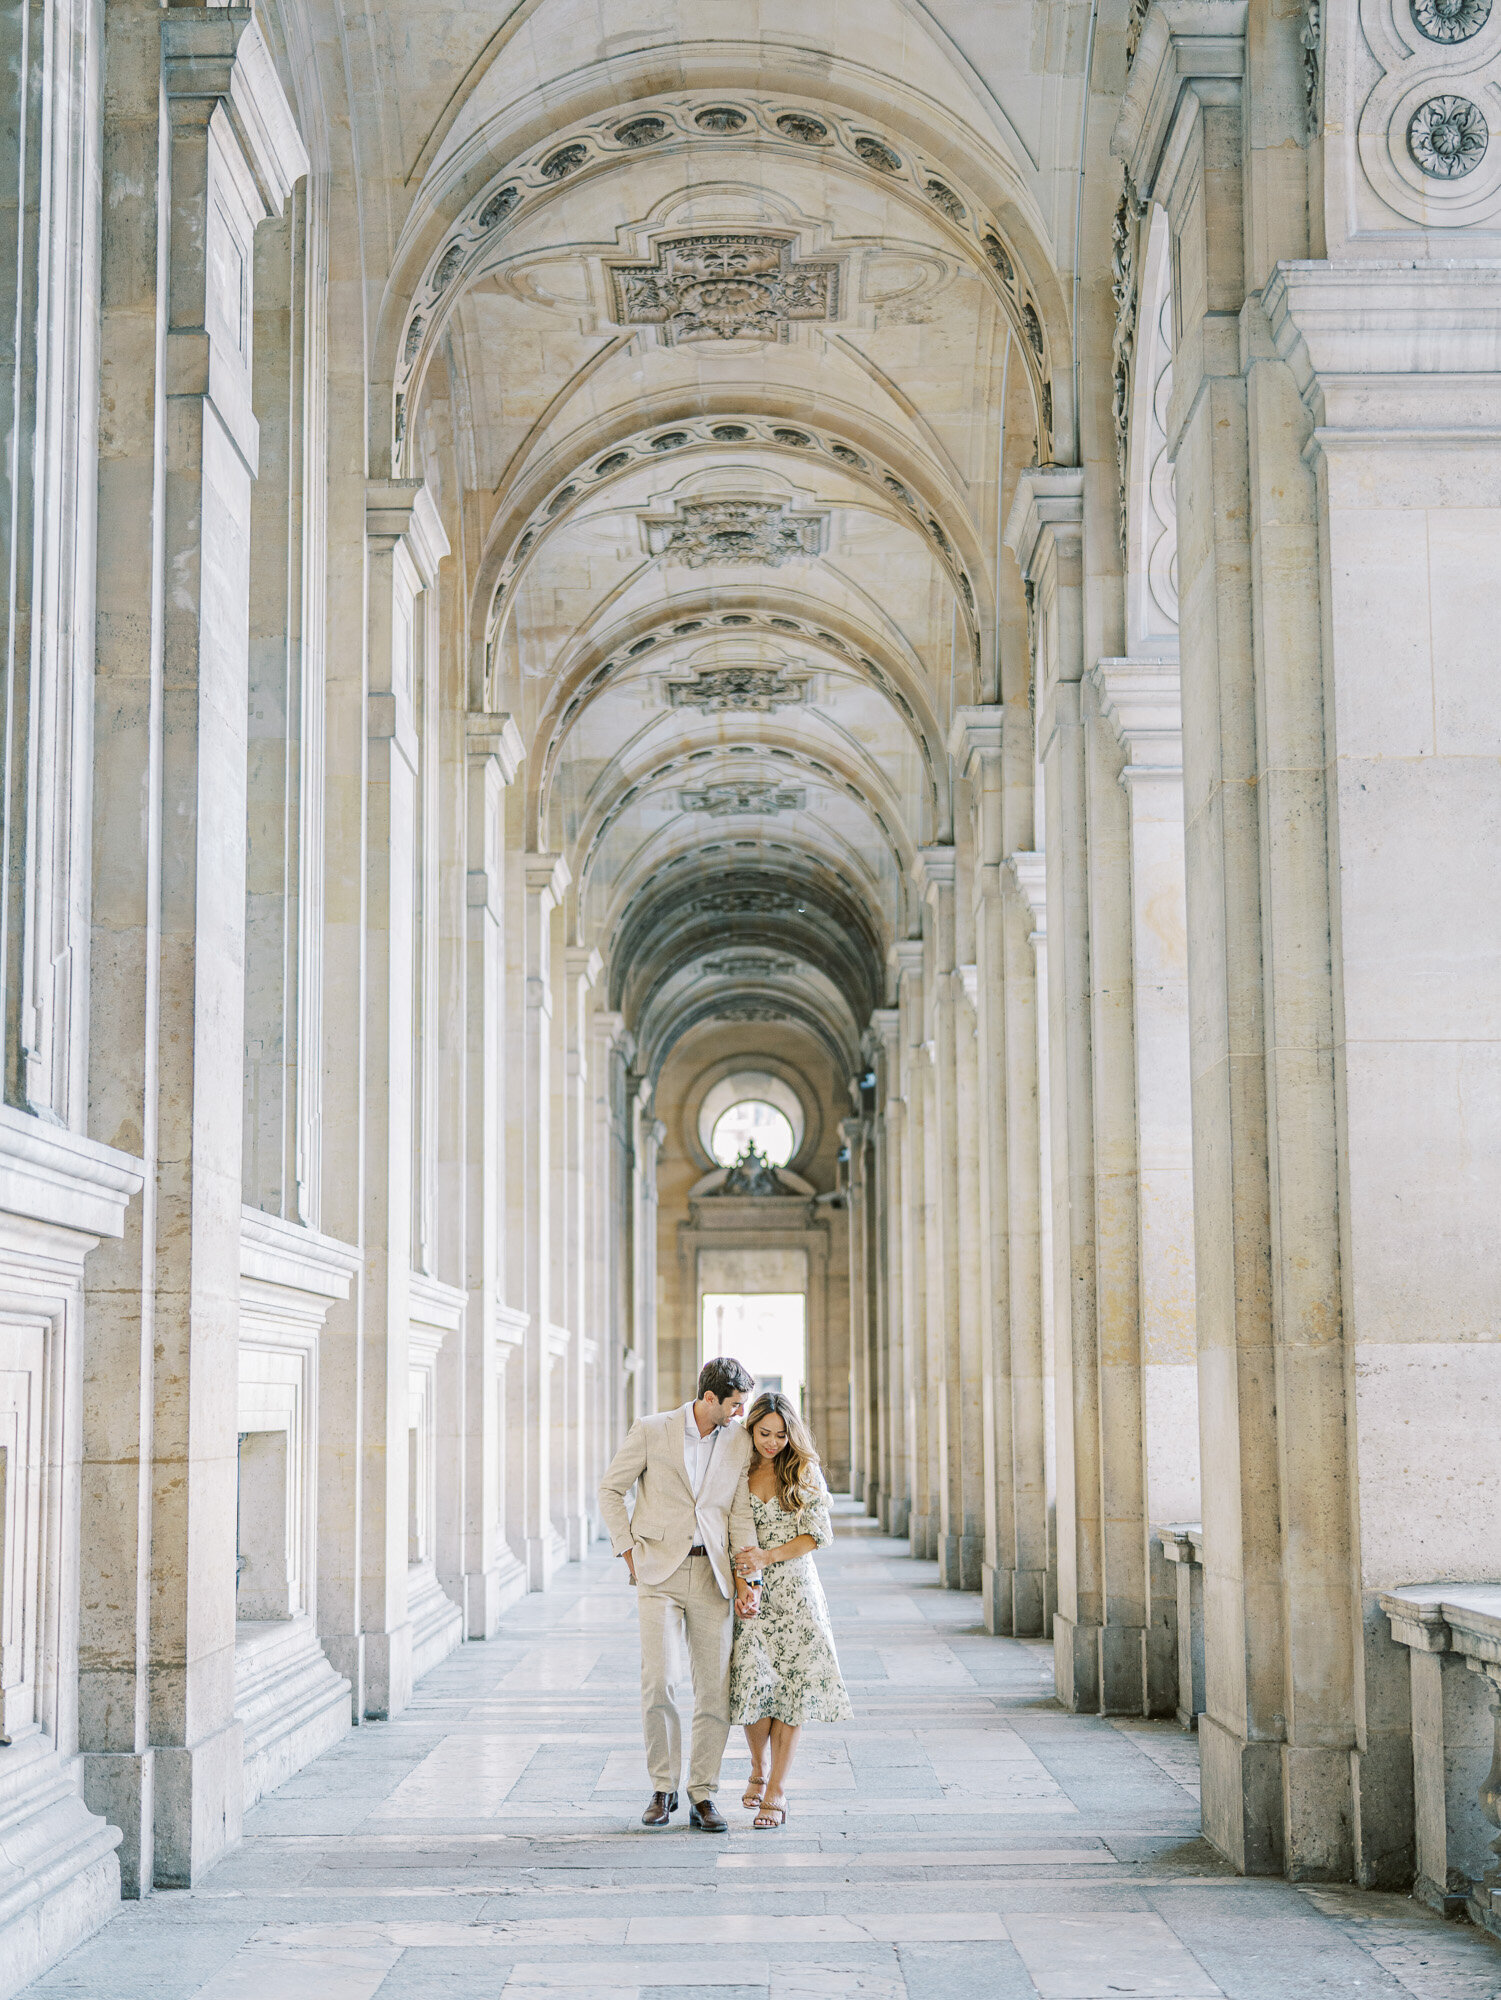 Christine & Kyle Paris Photosession by Tatyana Chaiko photographer in France-190